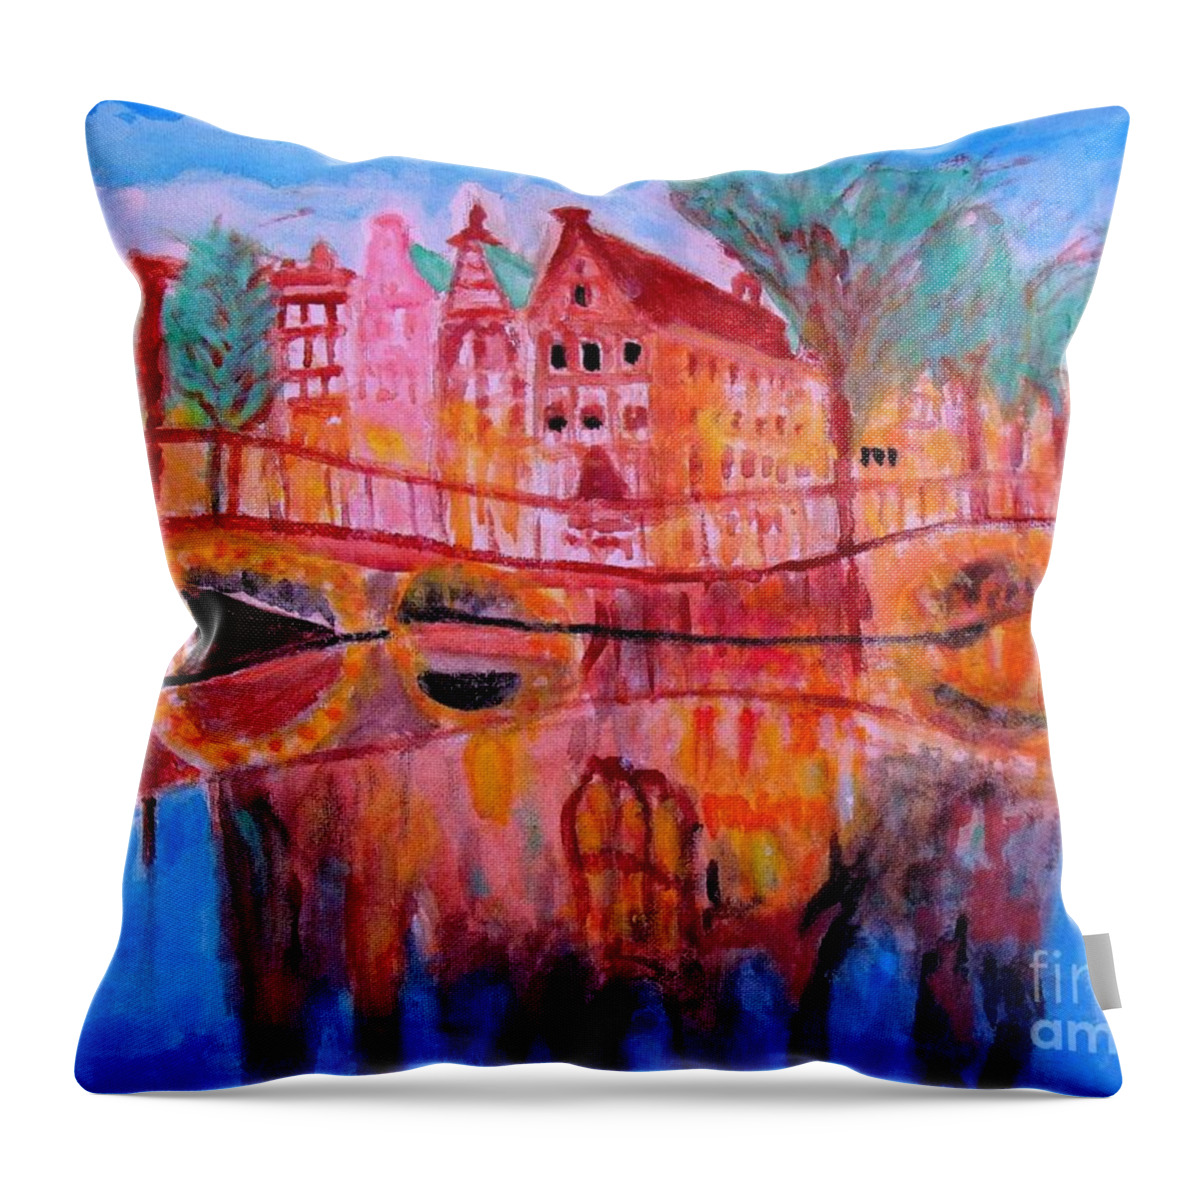 Netherlands Dreamscape Throw Pillow featuring the painting Netherland Dreamscape by Stanley Morganstein